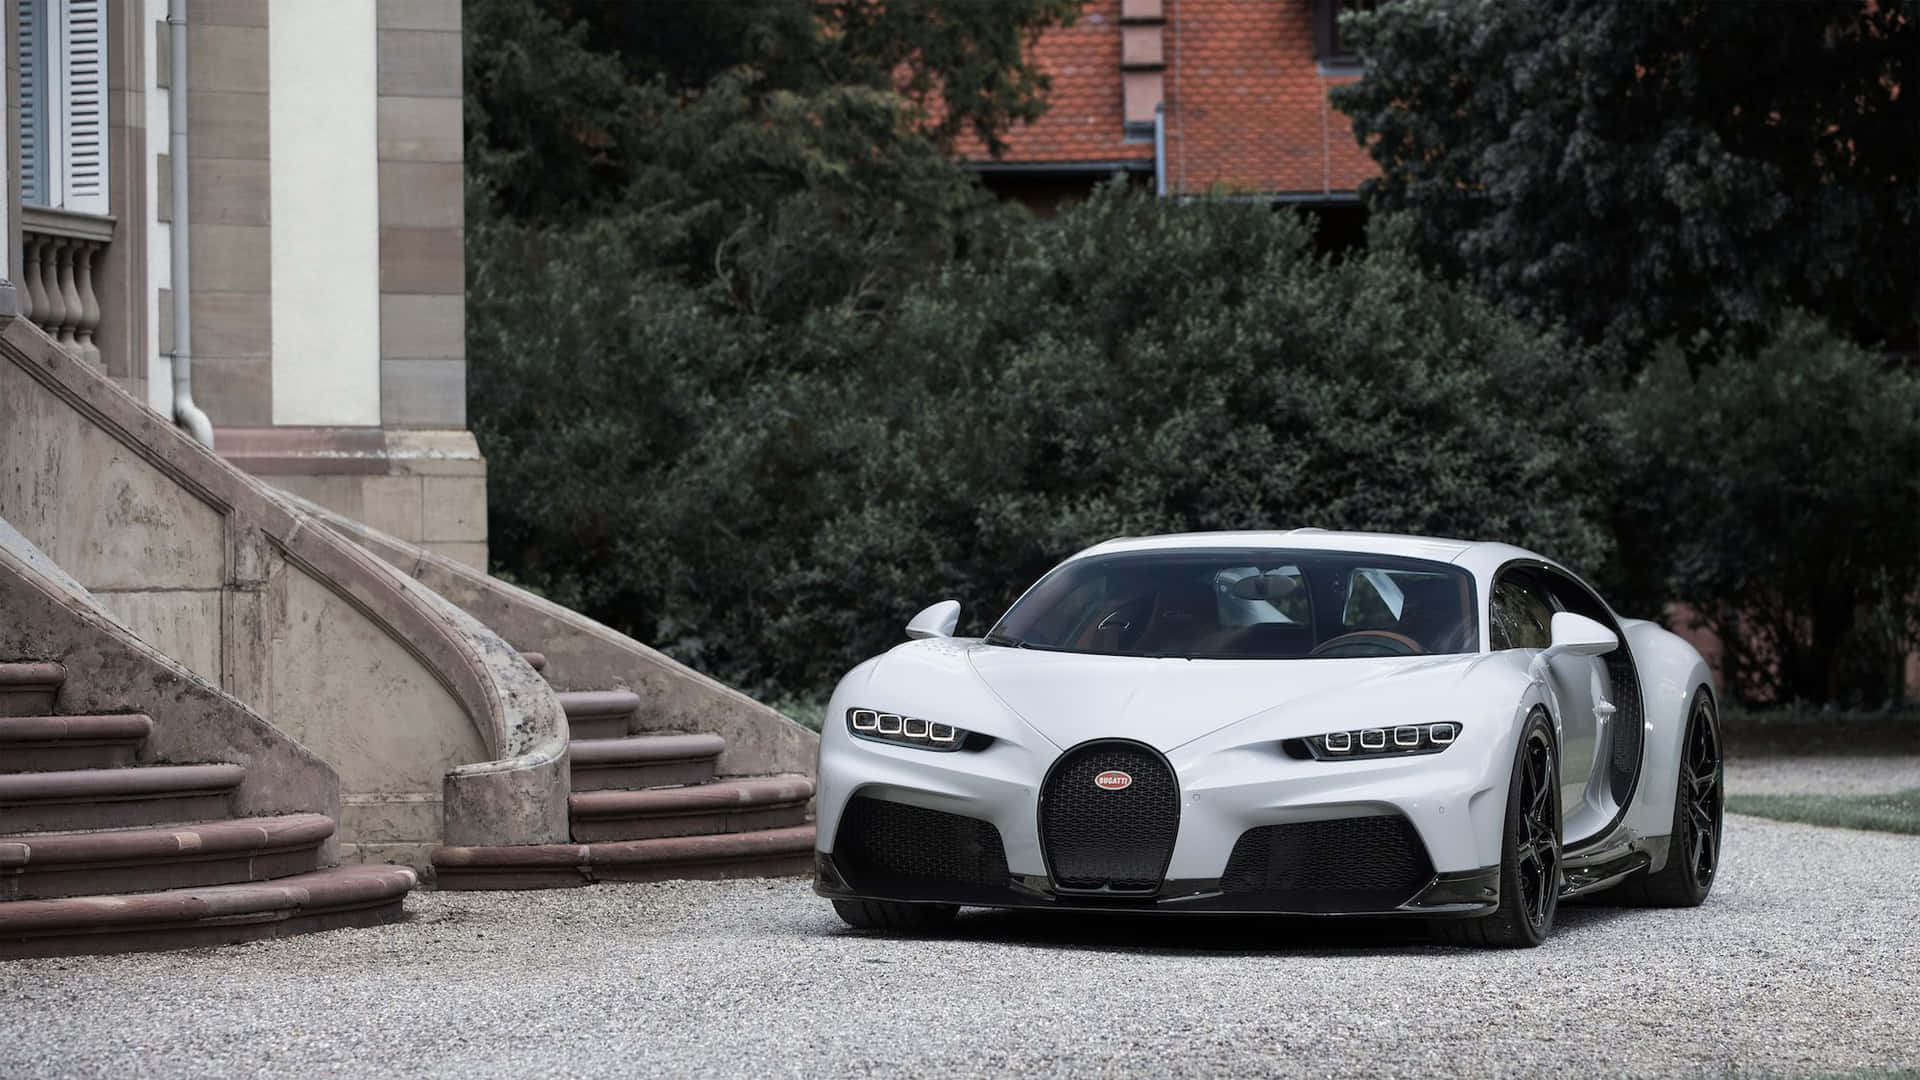 Experience Incredible Power with The Bugatti